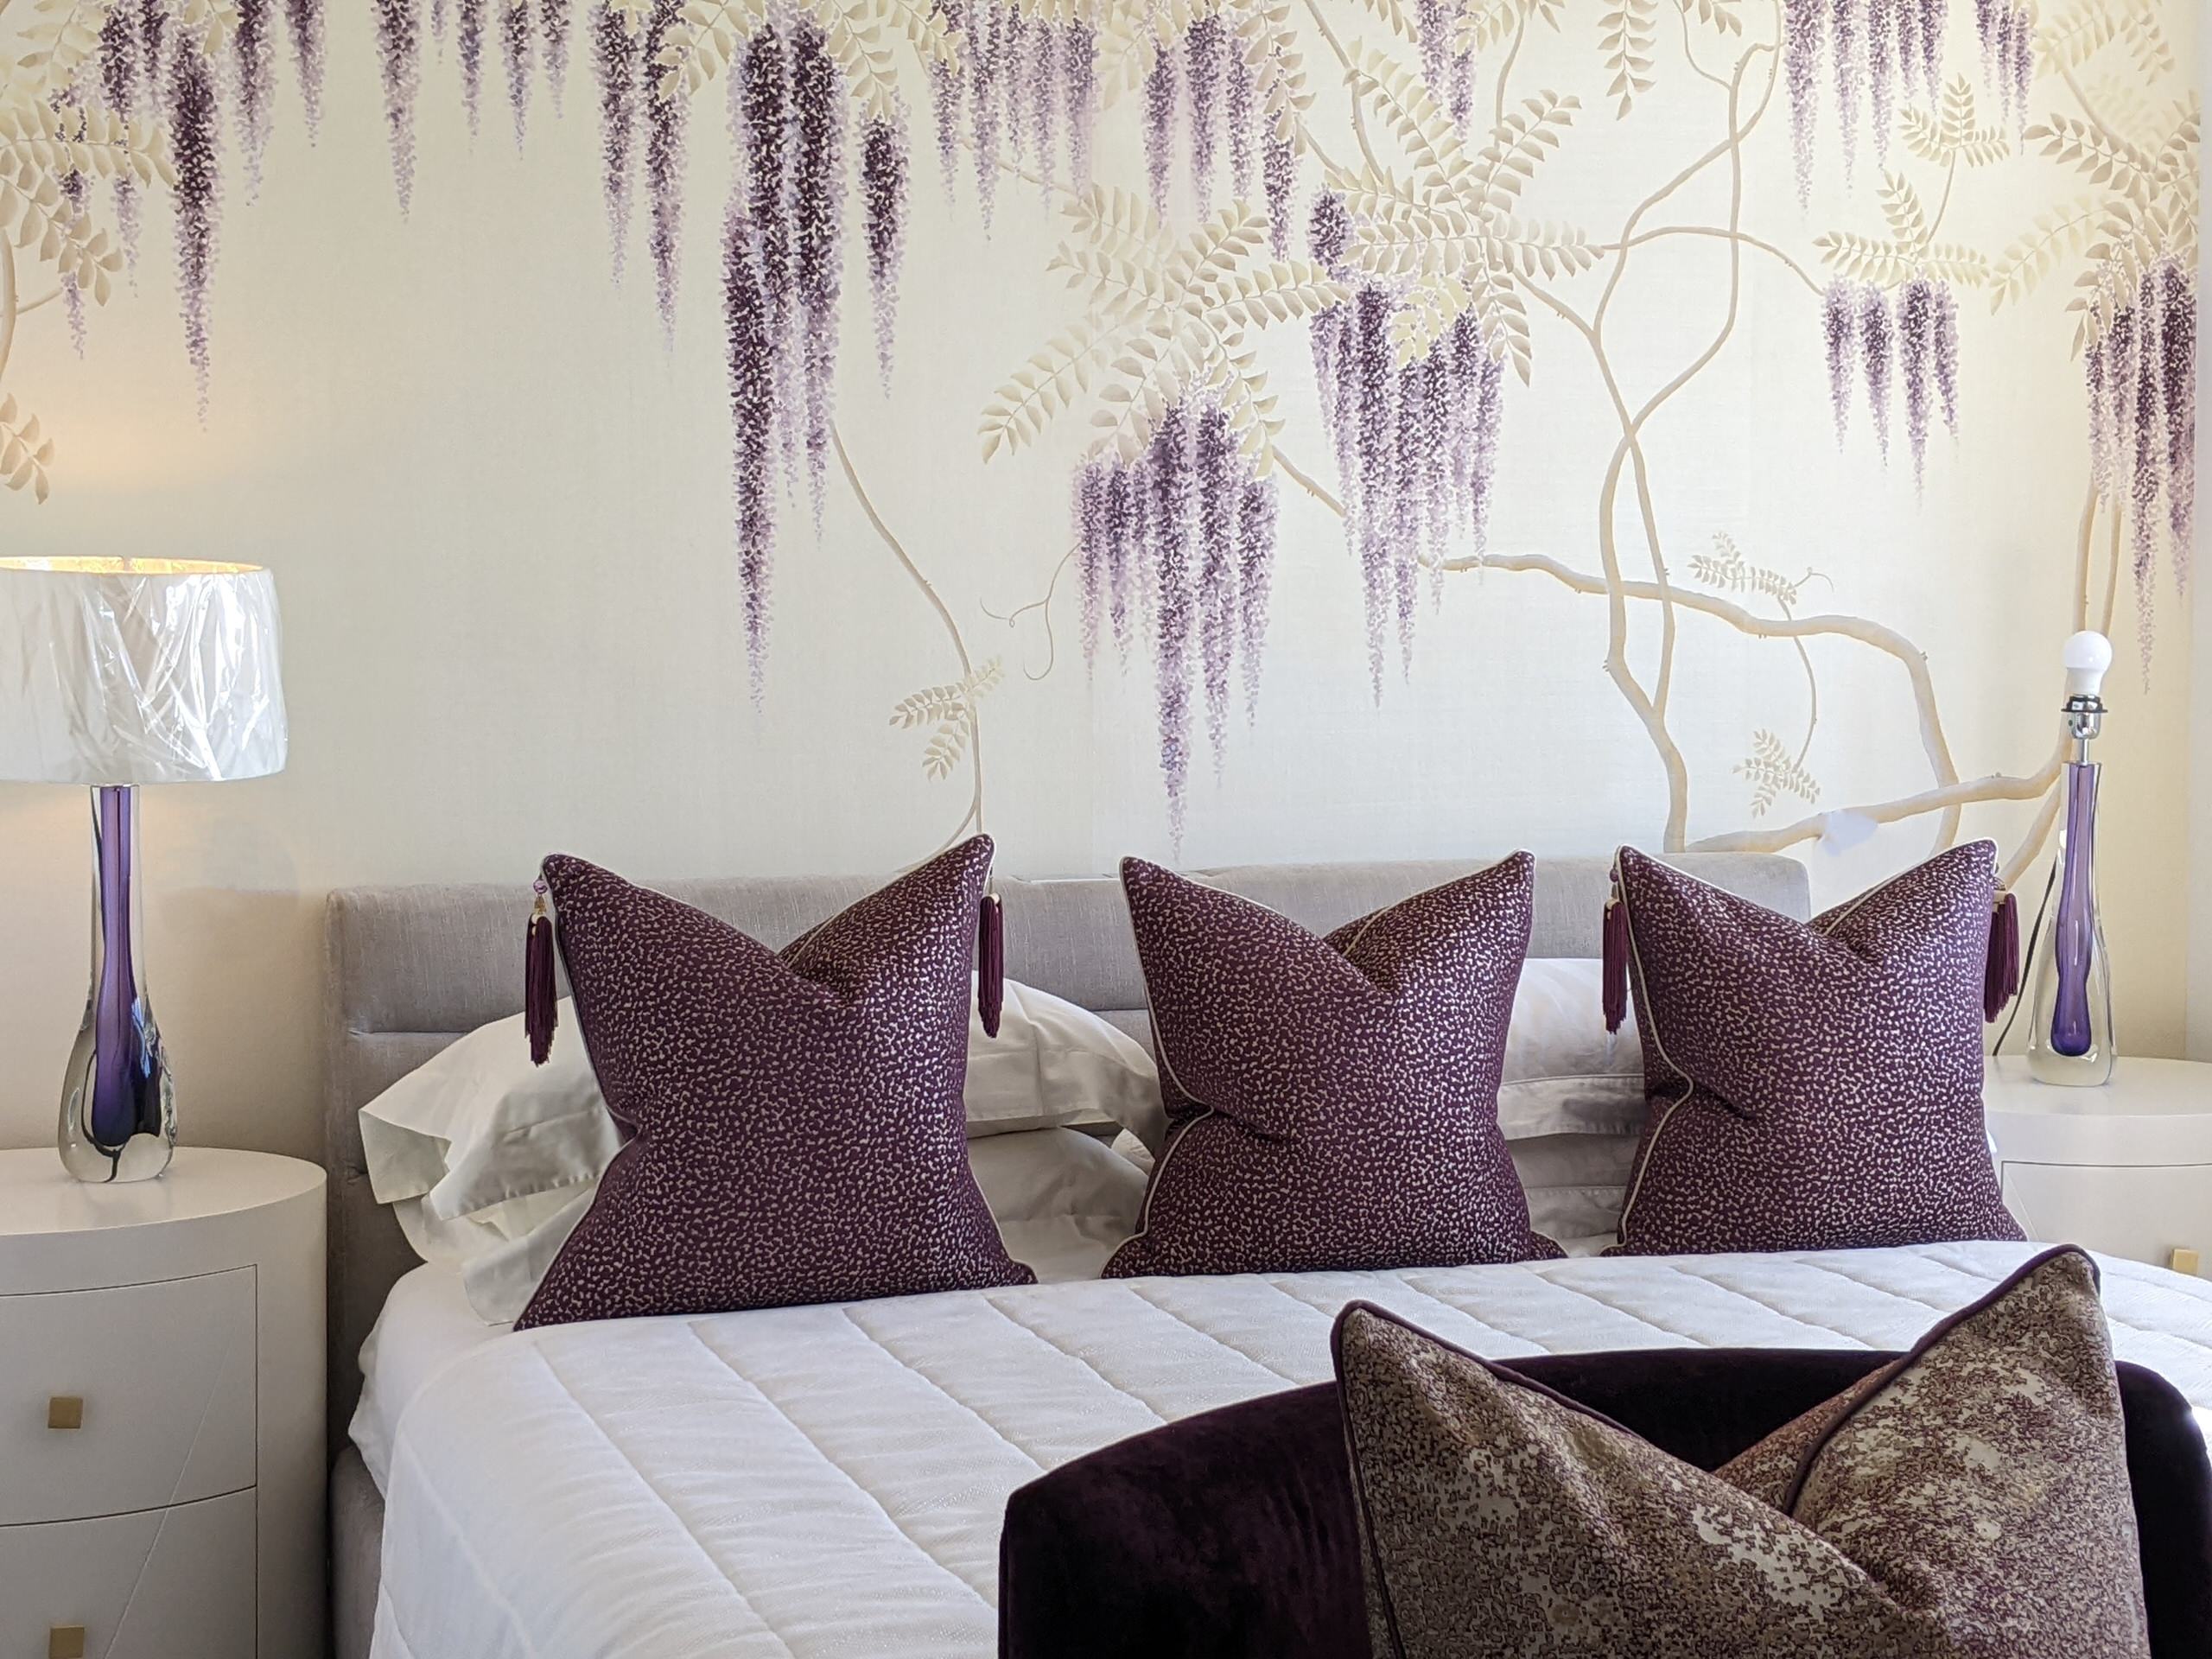 Custom majestic wisteria wallpaper inspired by Surrey Hills views, expertly curated and sourced from the home of silk hand-painted hand-embroided wallcoverings (China), bespoke bedside tables designed